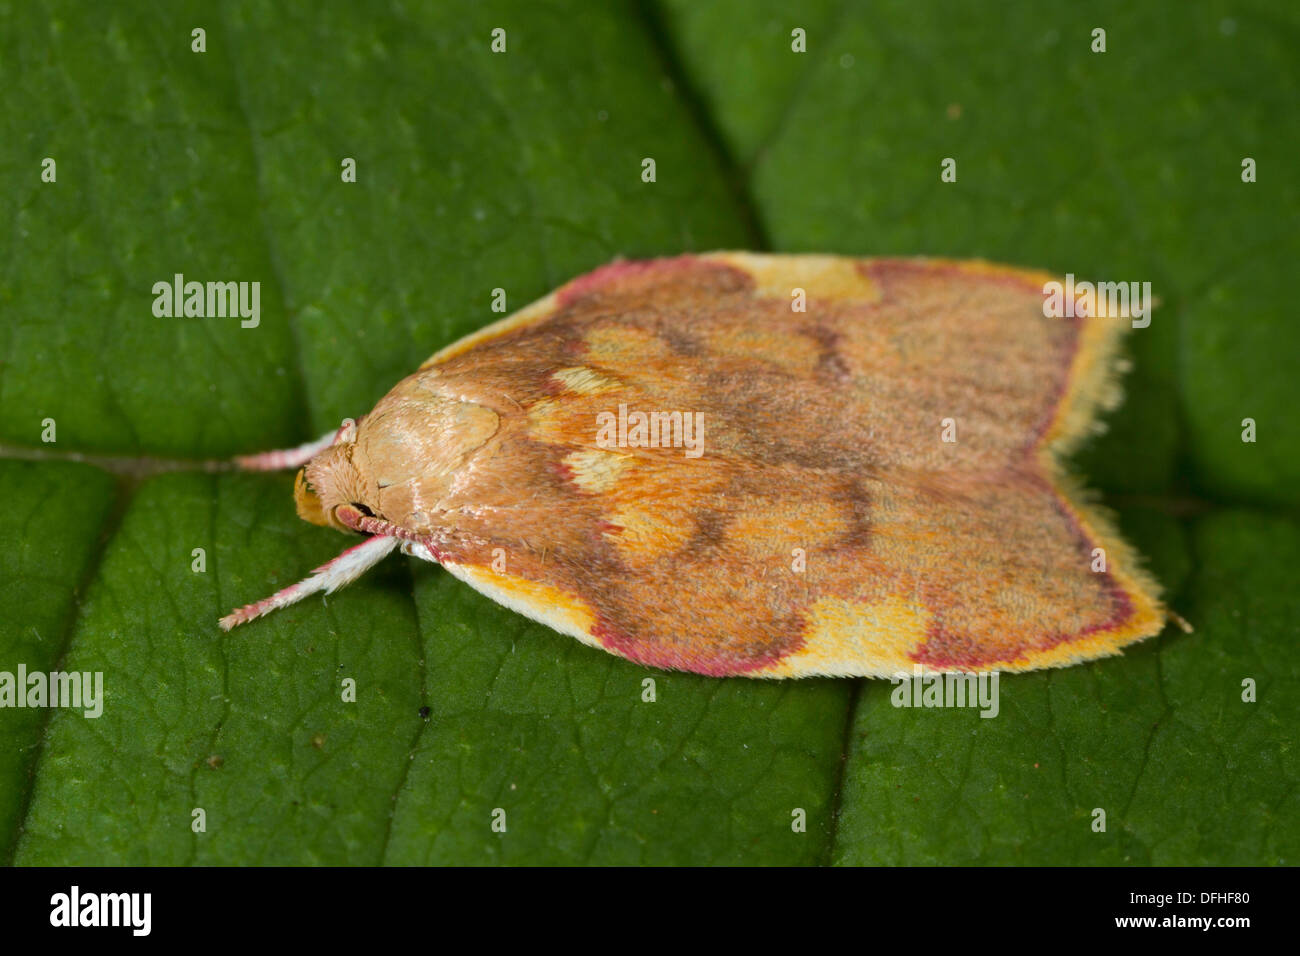 Carcina quercana moth resting on a leaf Stock Photo